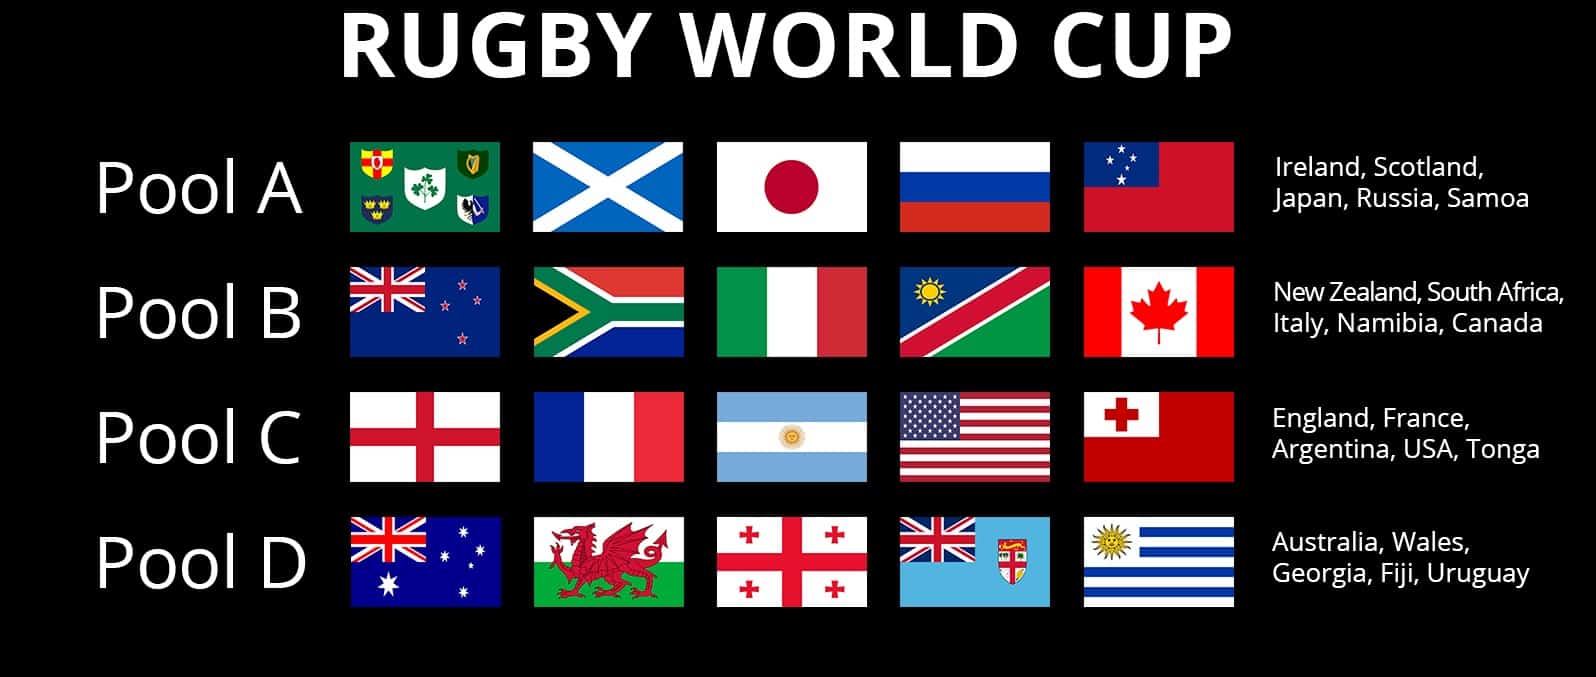 Where To Watch The 2019 Rugby World Cup - LiveSport Center